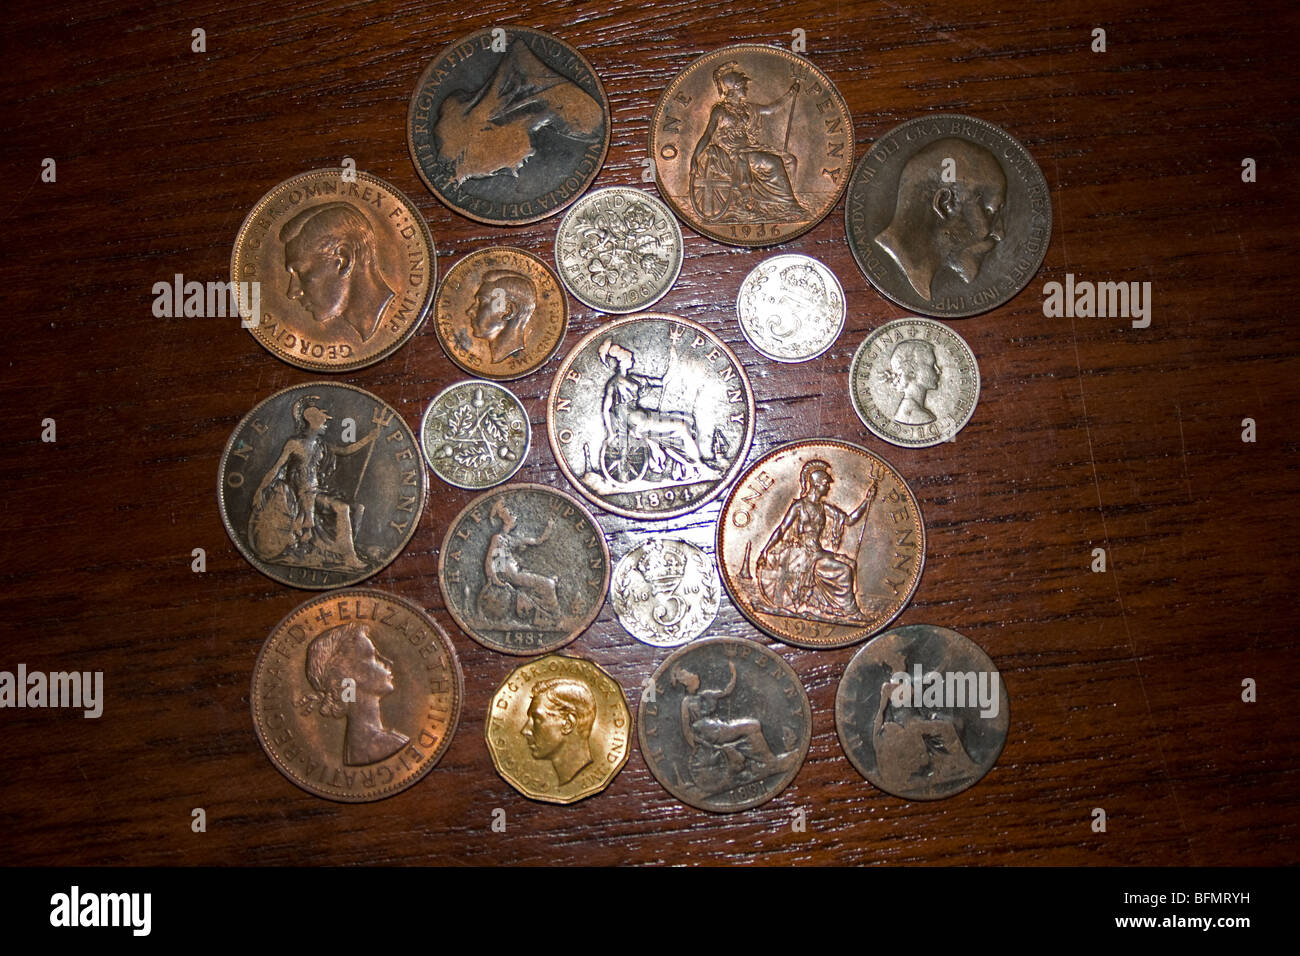 Collection of pre-decimal English coins Stock Photo